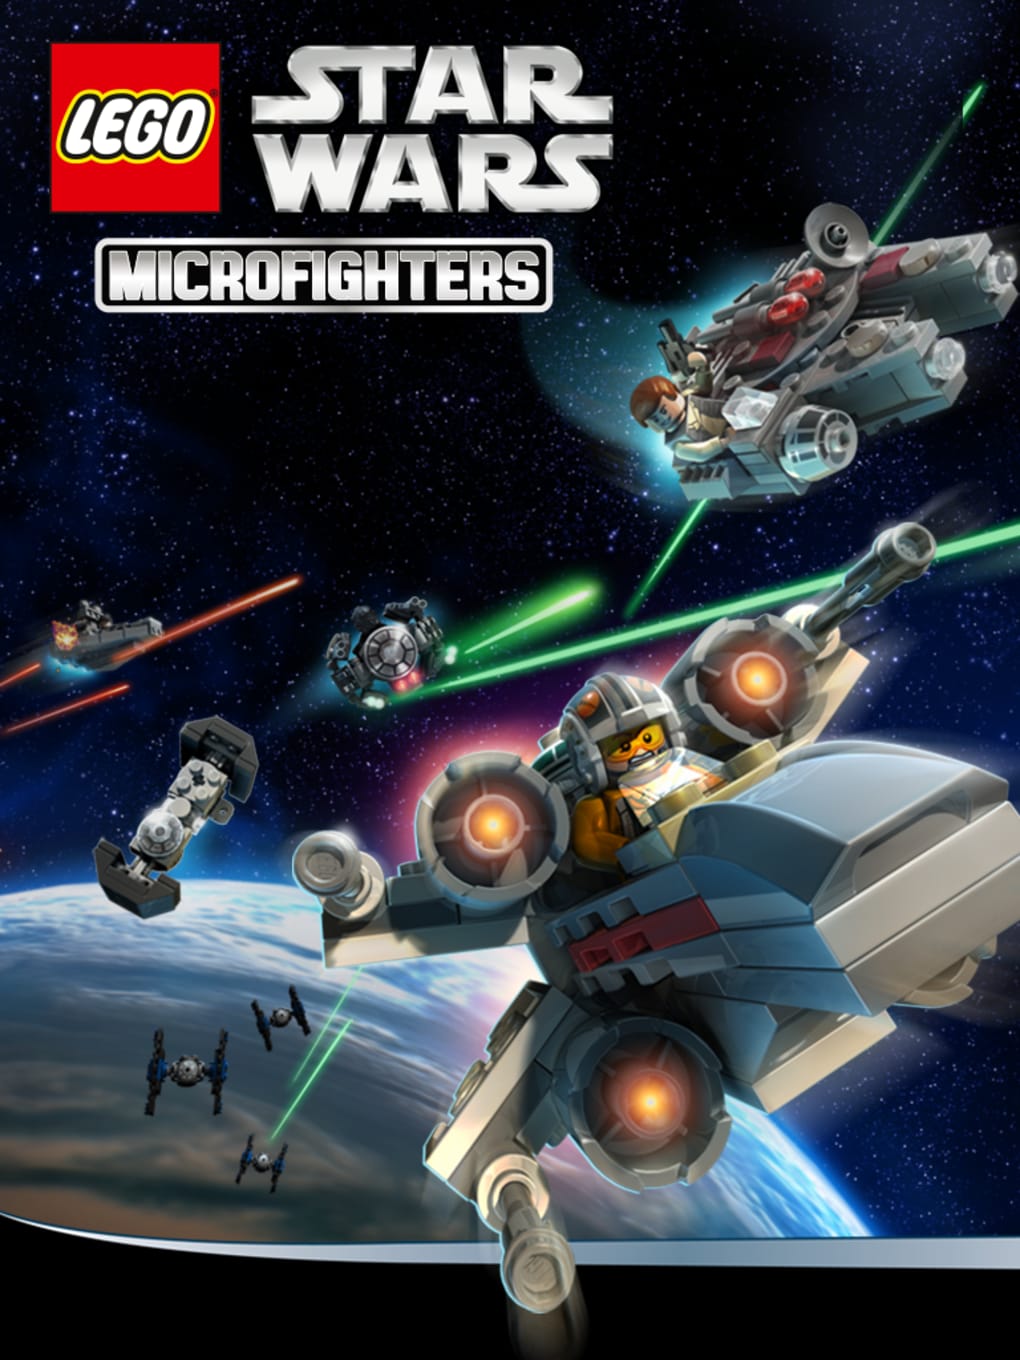 LEGO Star Wars Microfighters – Android : Warner Bros. International  Enterprises : Free Download, Borrow, and Streaming : Internet Archive